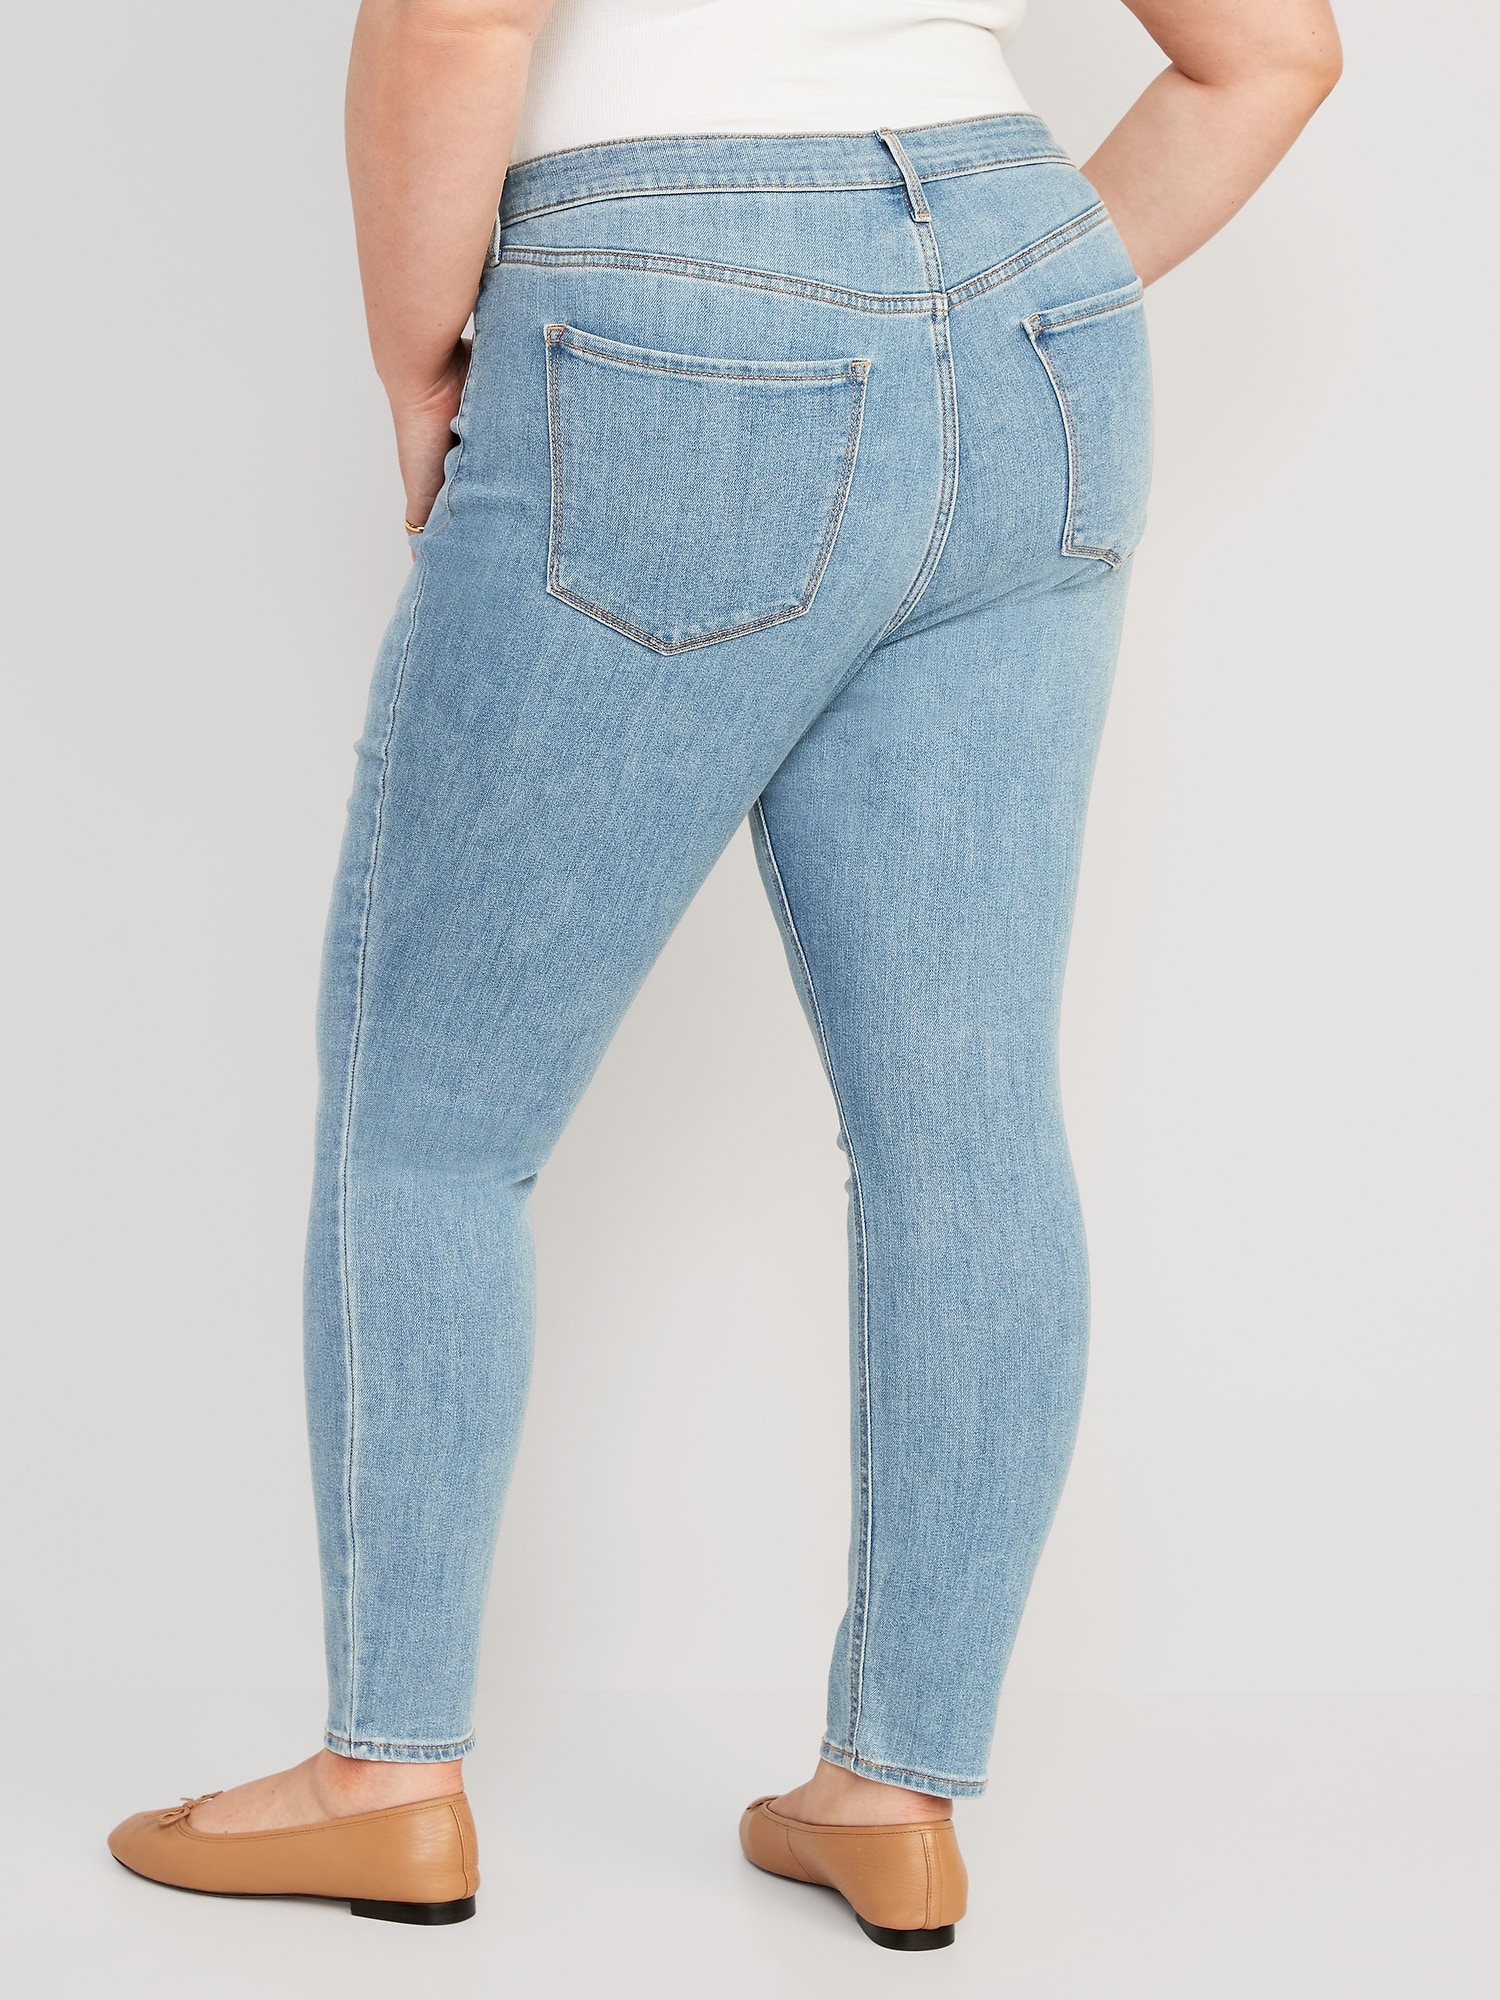 High-Waisted Dark-Wash Super Skinny Jeans for Women - Old Navy